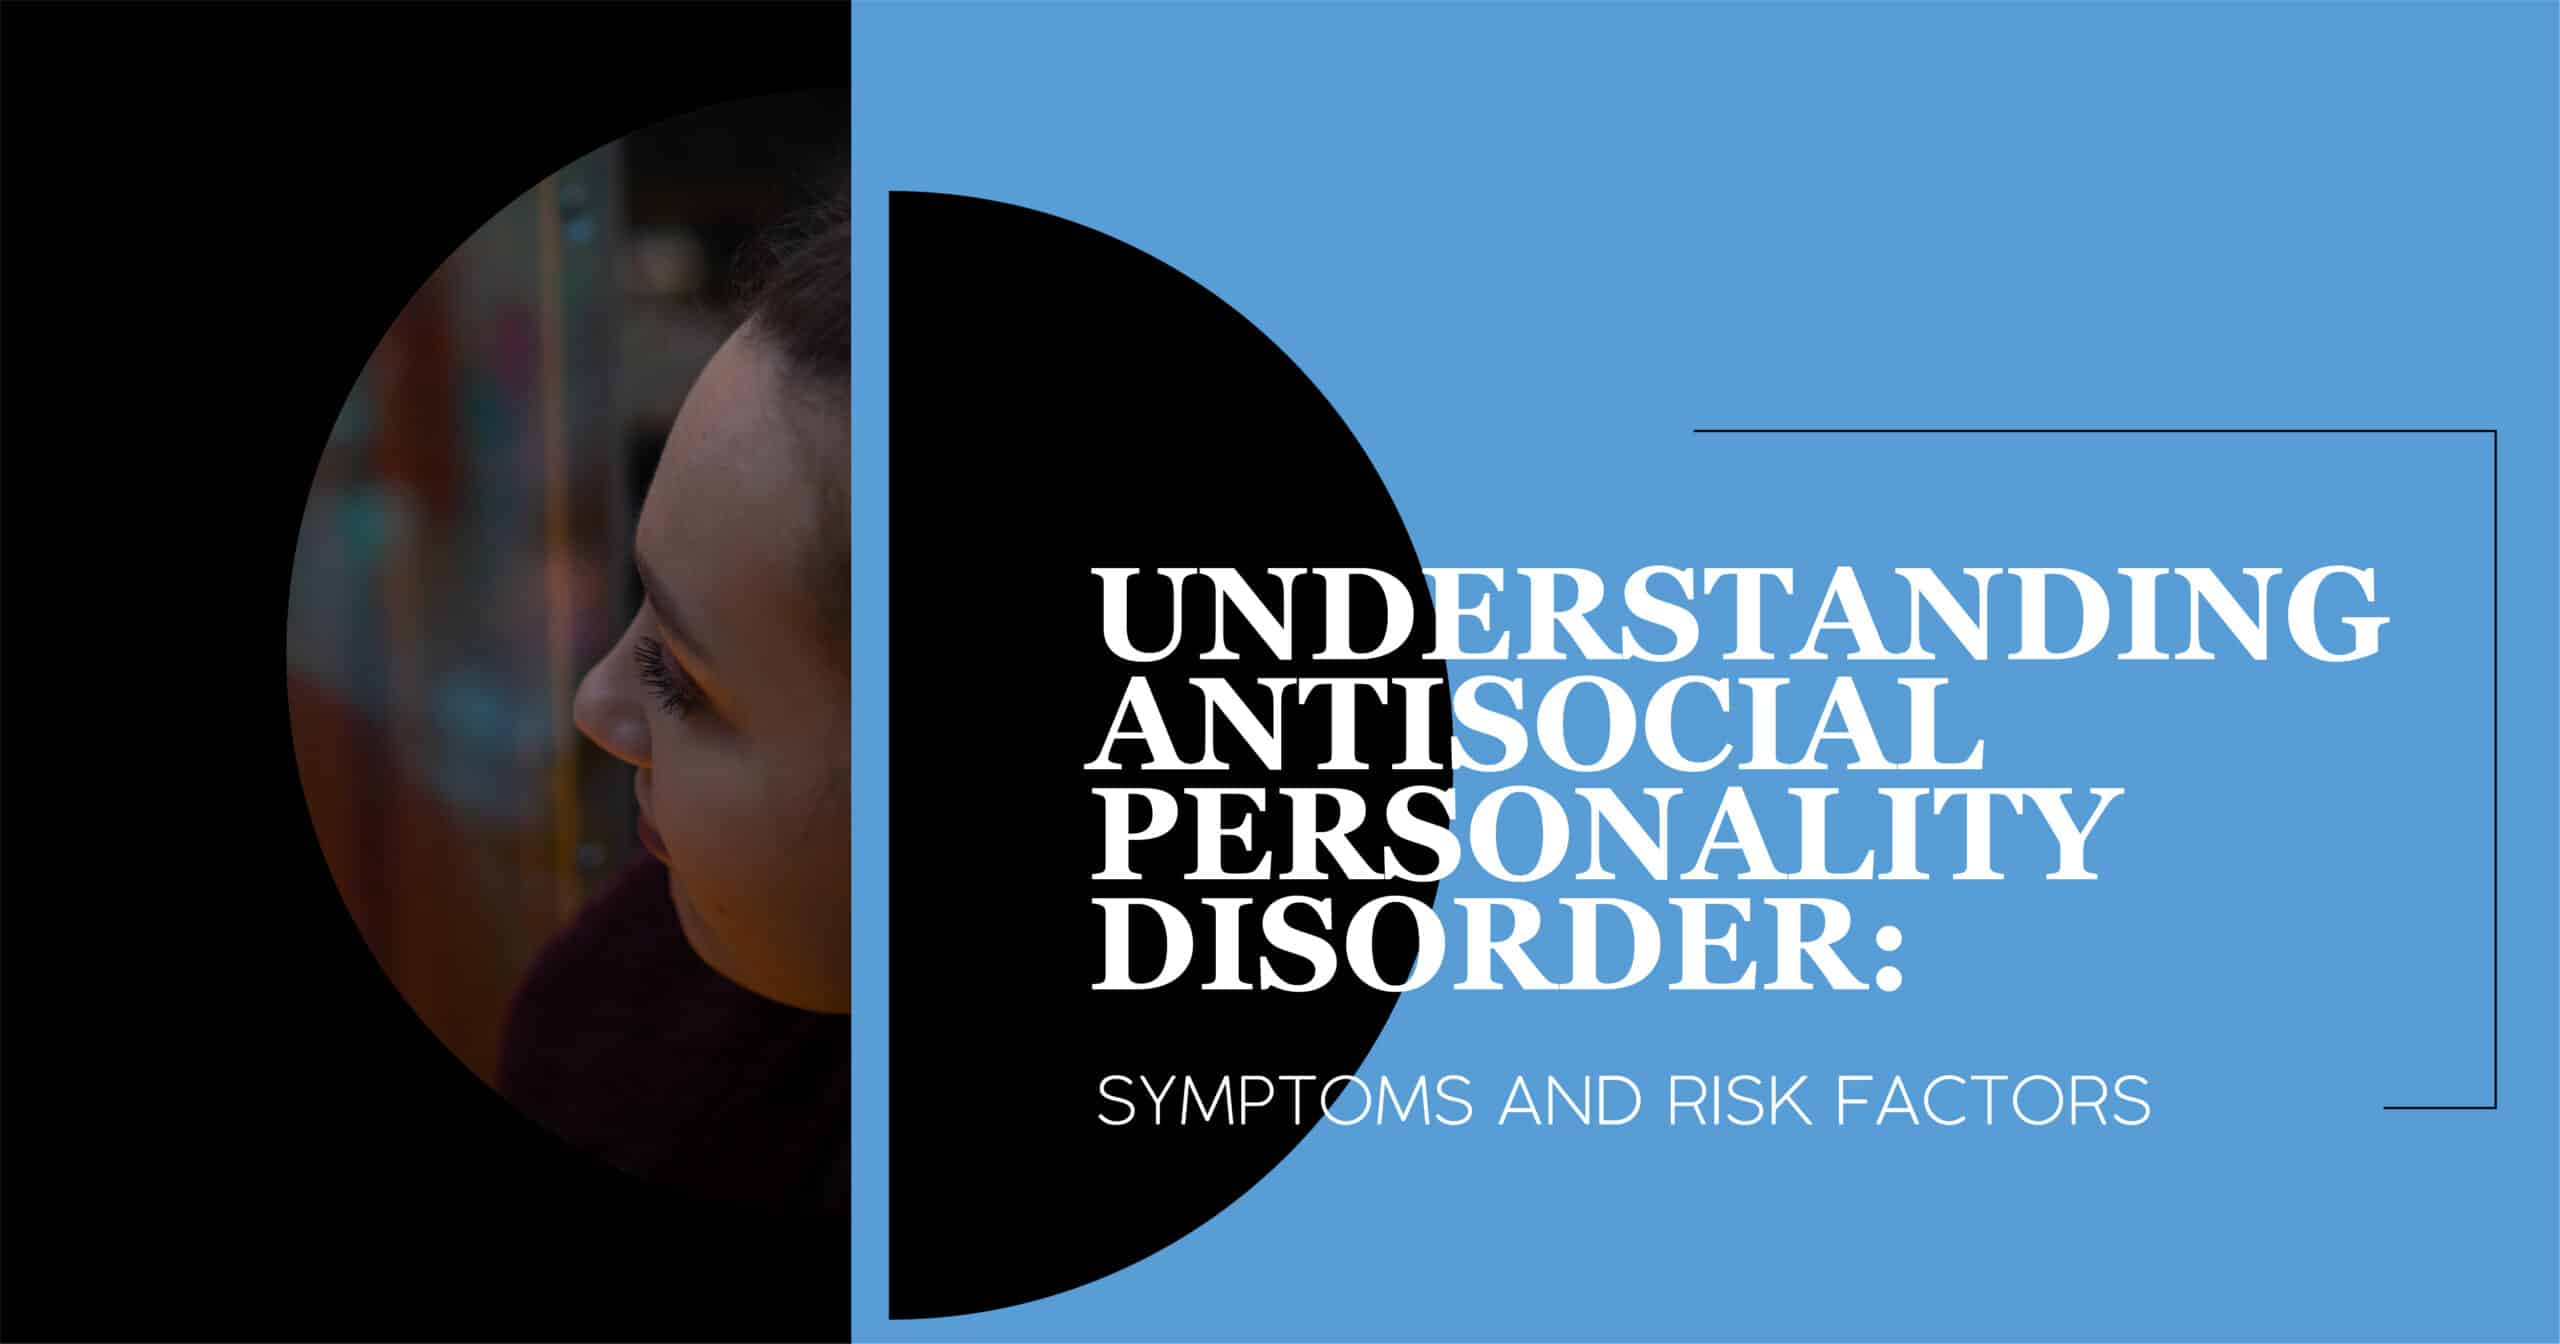 Understanding Antisocial Personality Disorder: Symptoms and Risk Factors